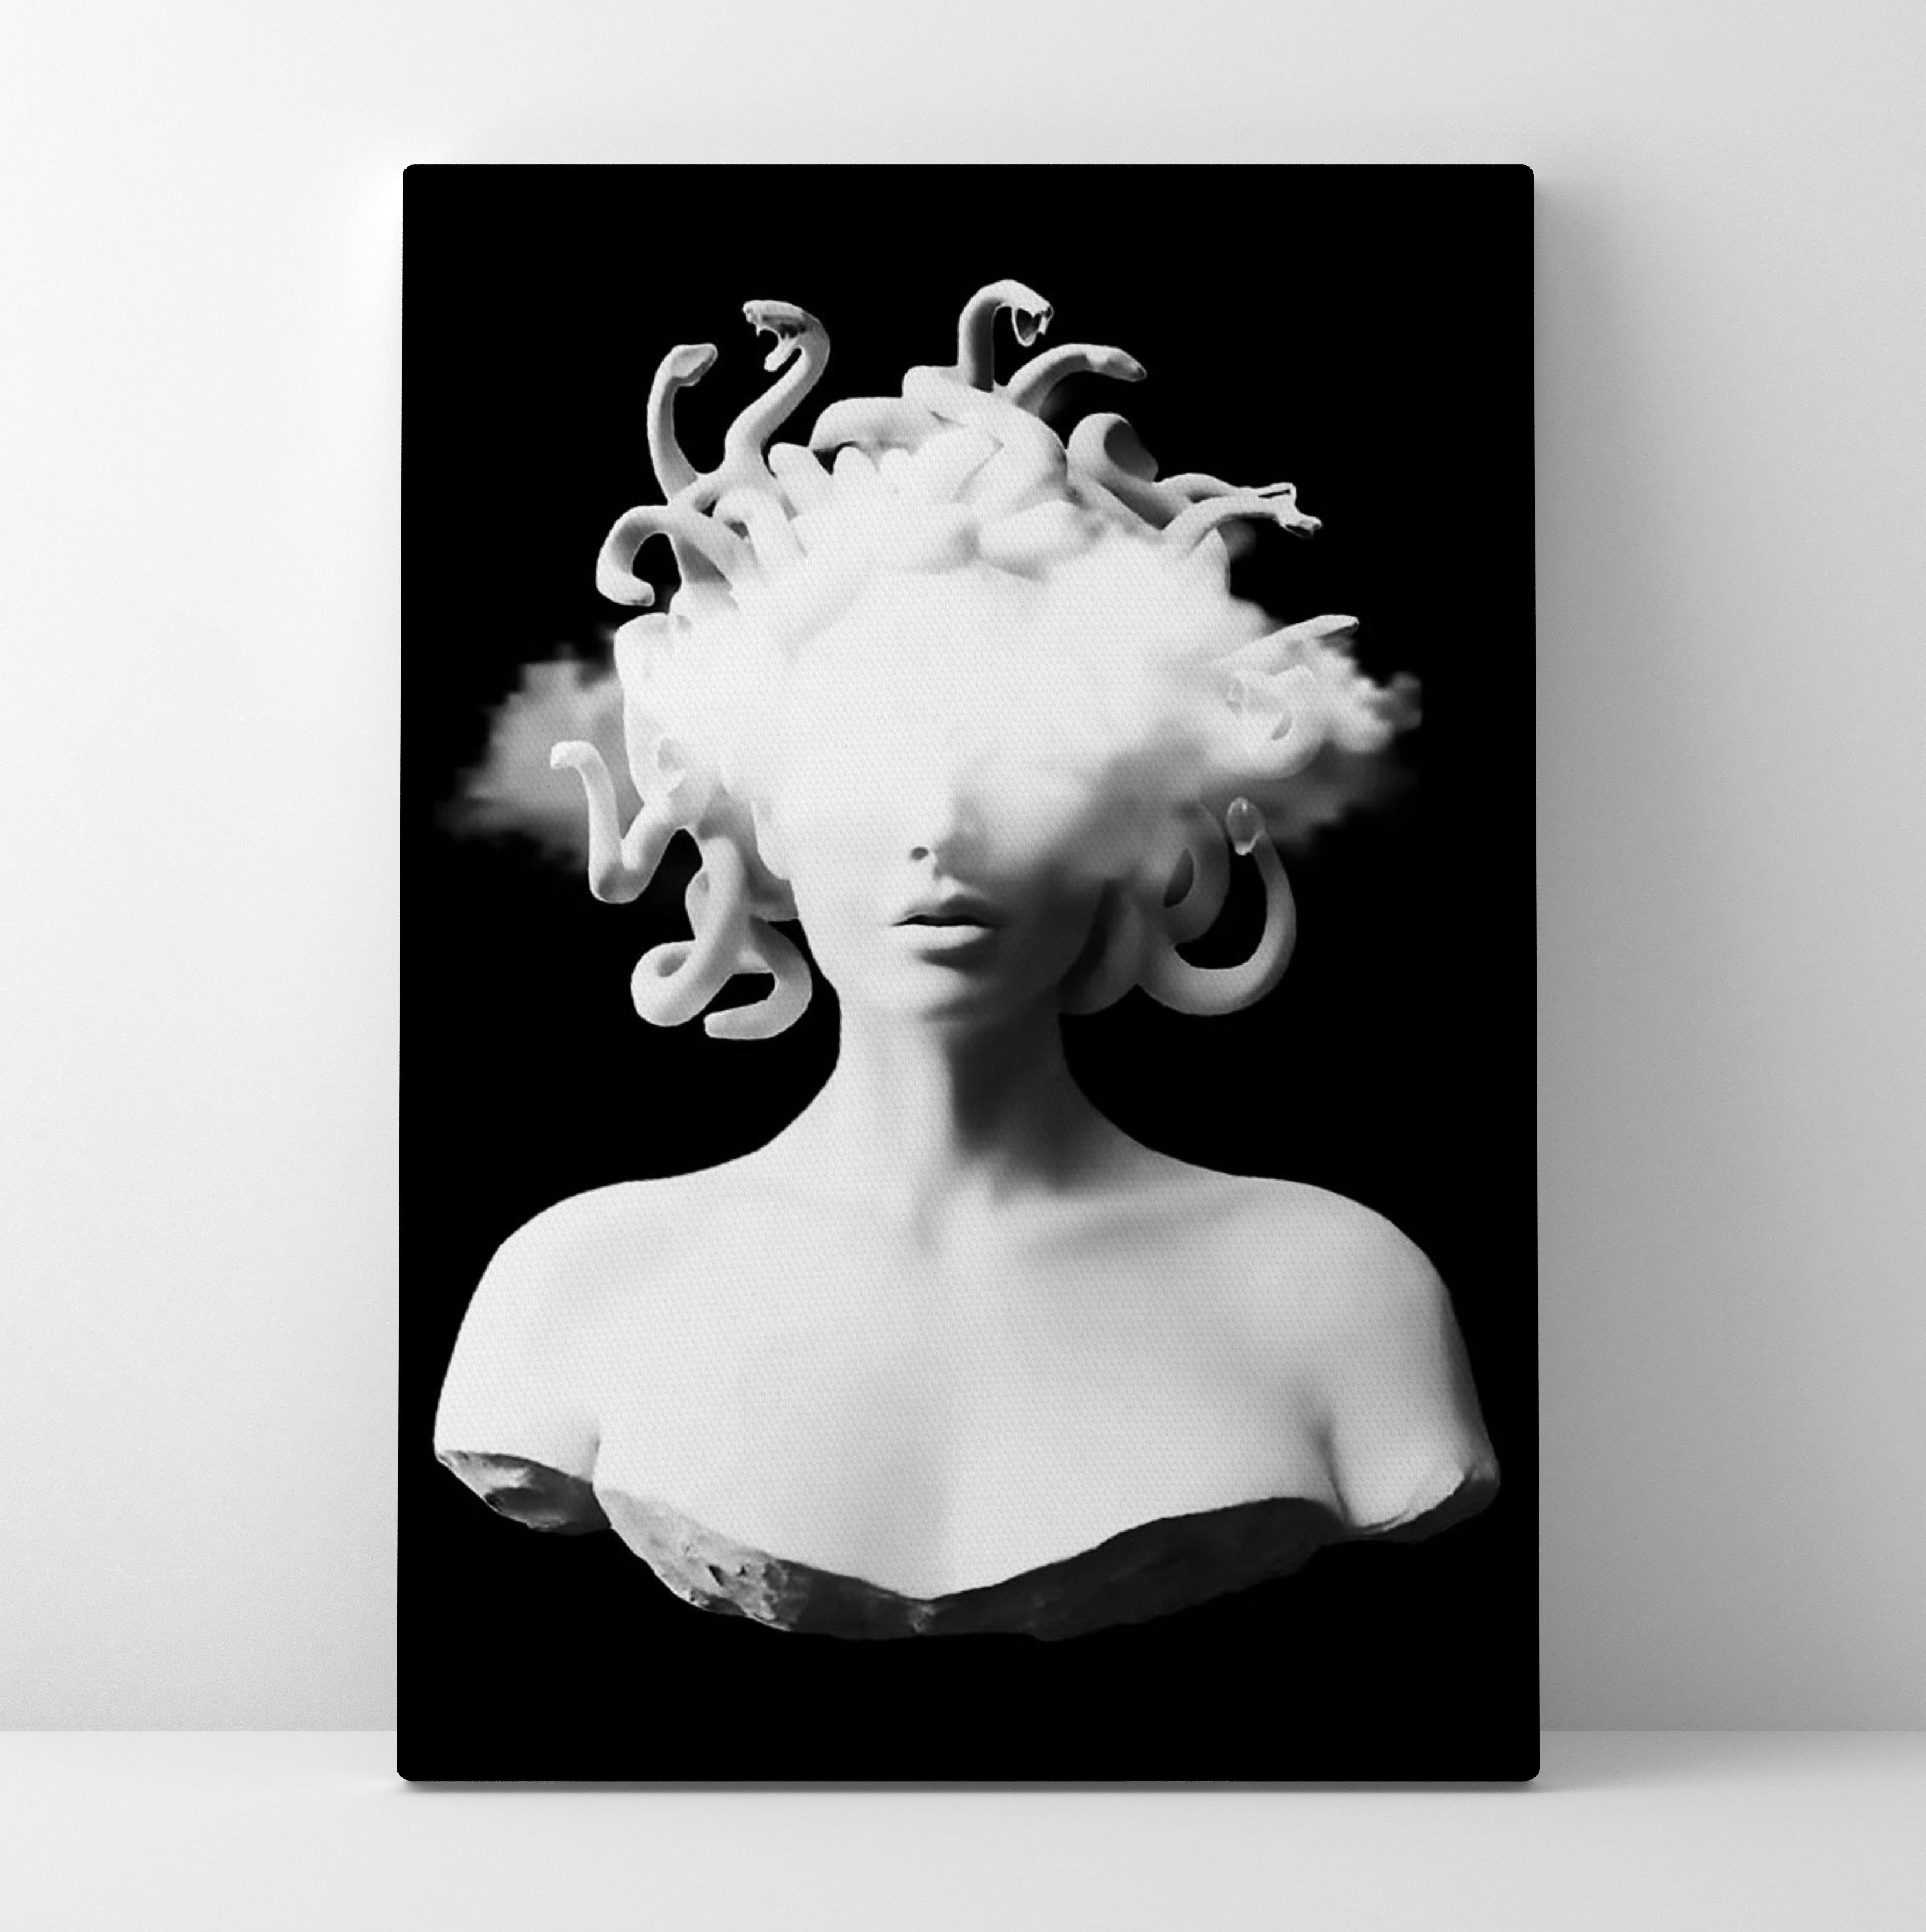 A black and white photo of an artwork with smoke coming out - Medusa